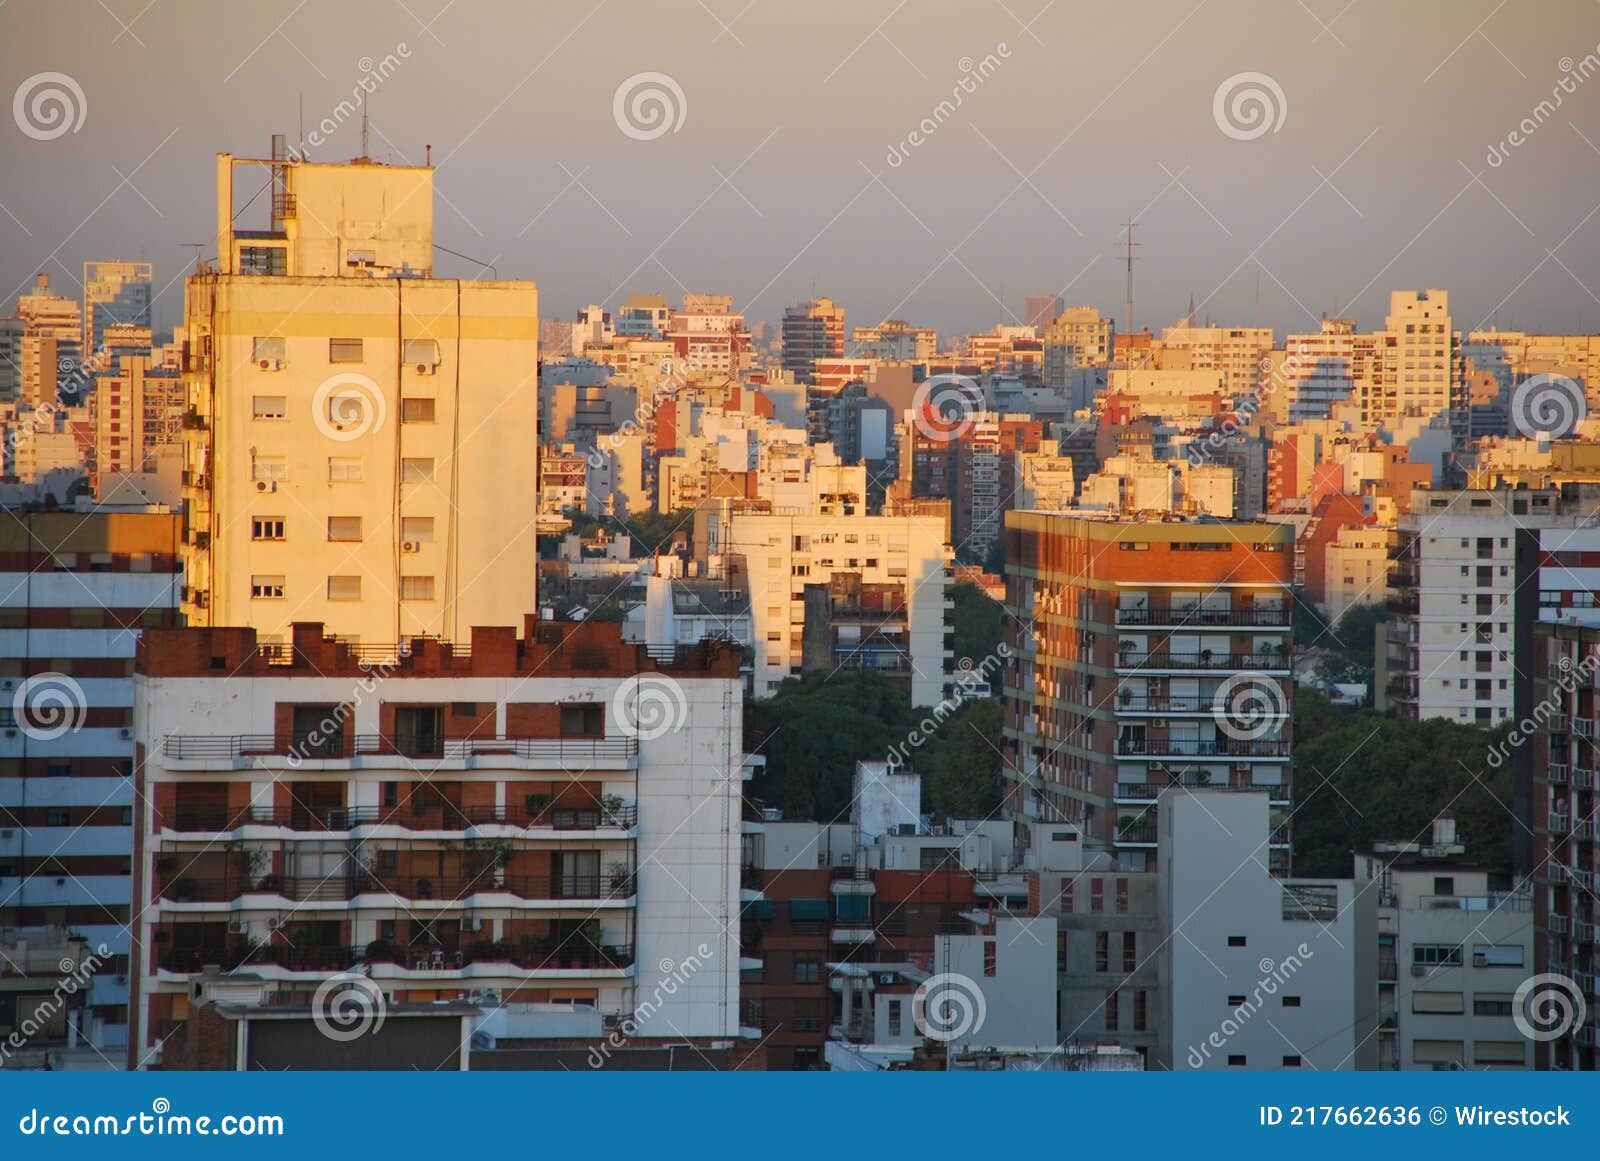 sunrise in buenos aires with highrises